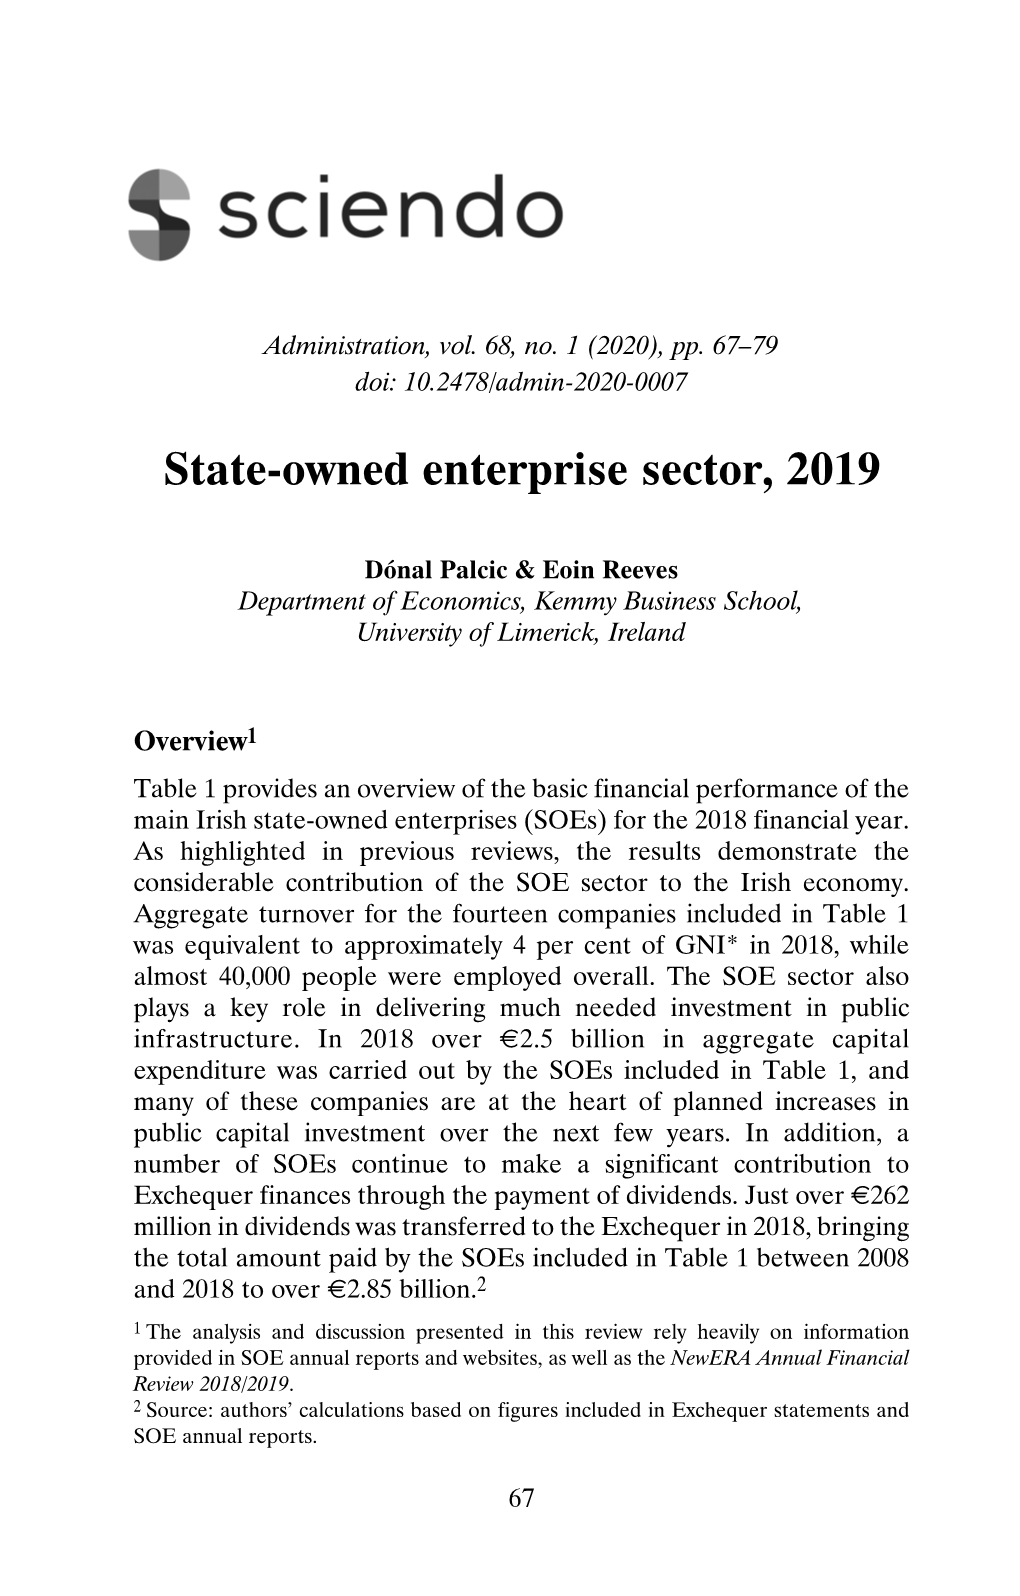 State-Owned Enterprise Sector, 2019